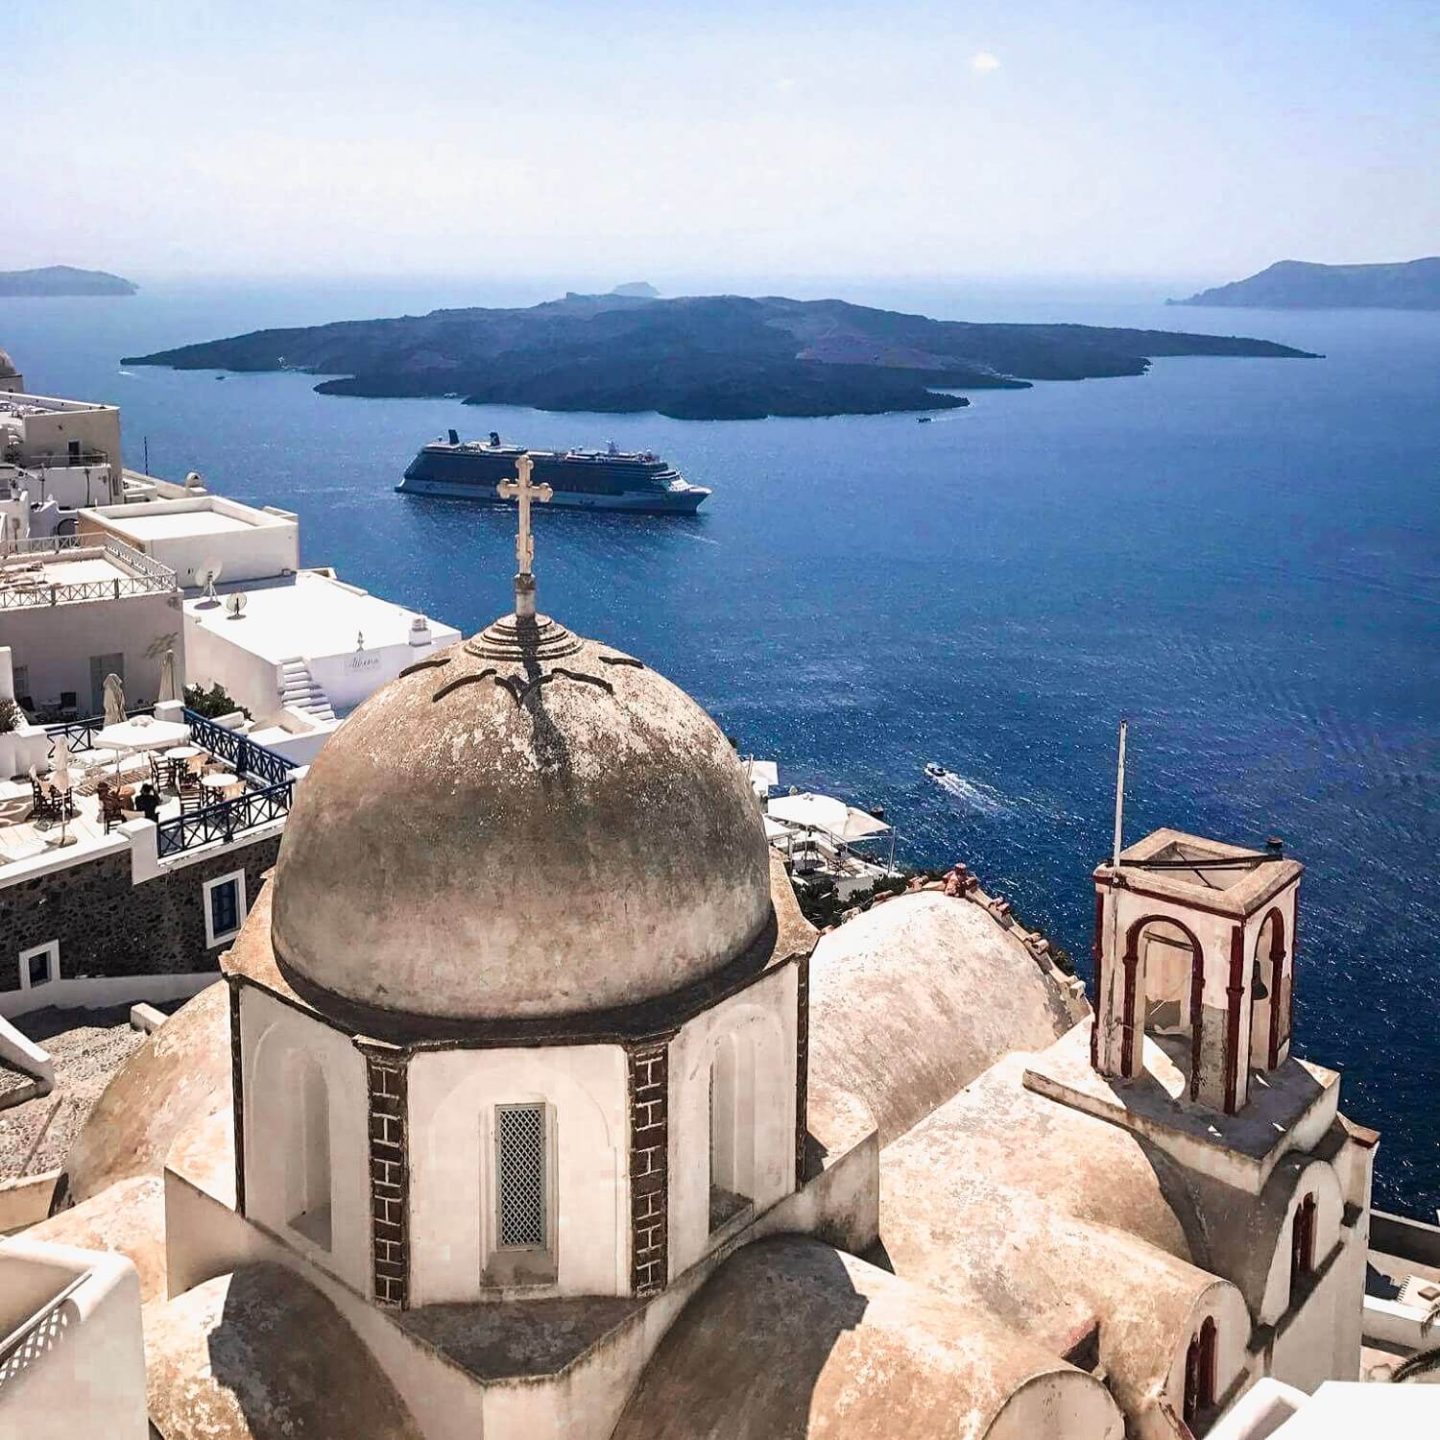 The First-Timer's 2020 Travel Guide to Santorini